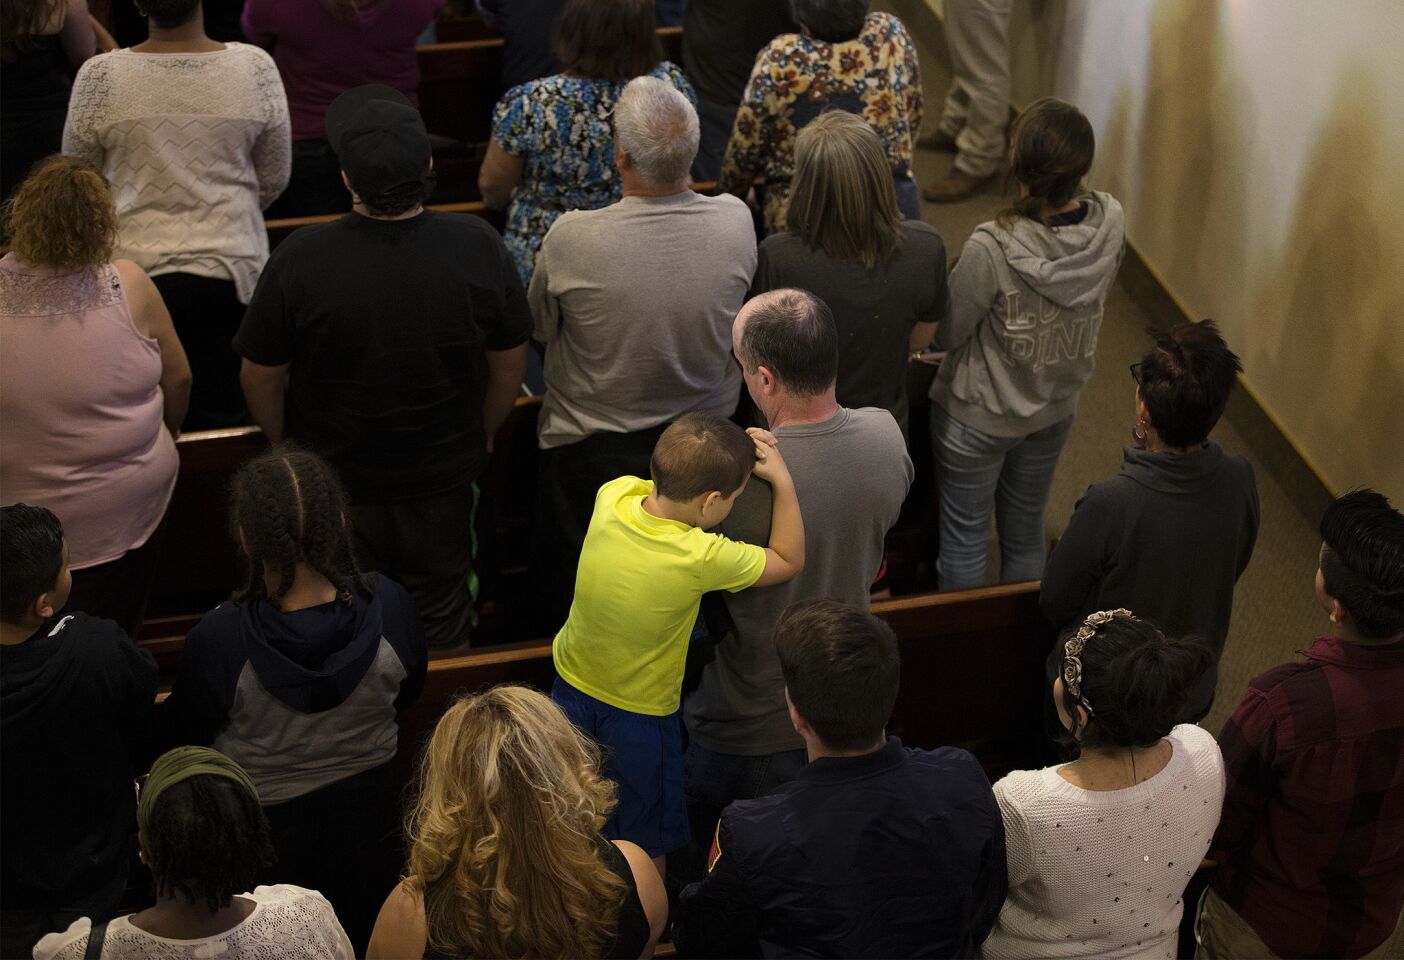 A child rests his head on his father's shoulder during a prayer service at Our Lady of Assumption Catholic Church for the victims in the shooting at North Park Elementary School.